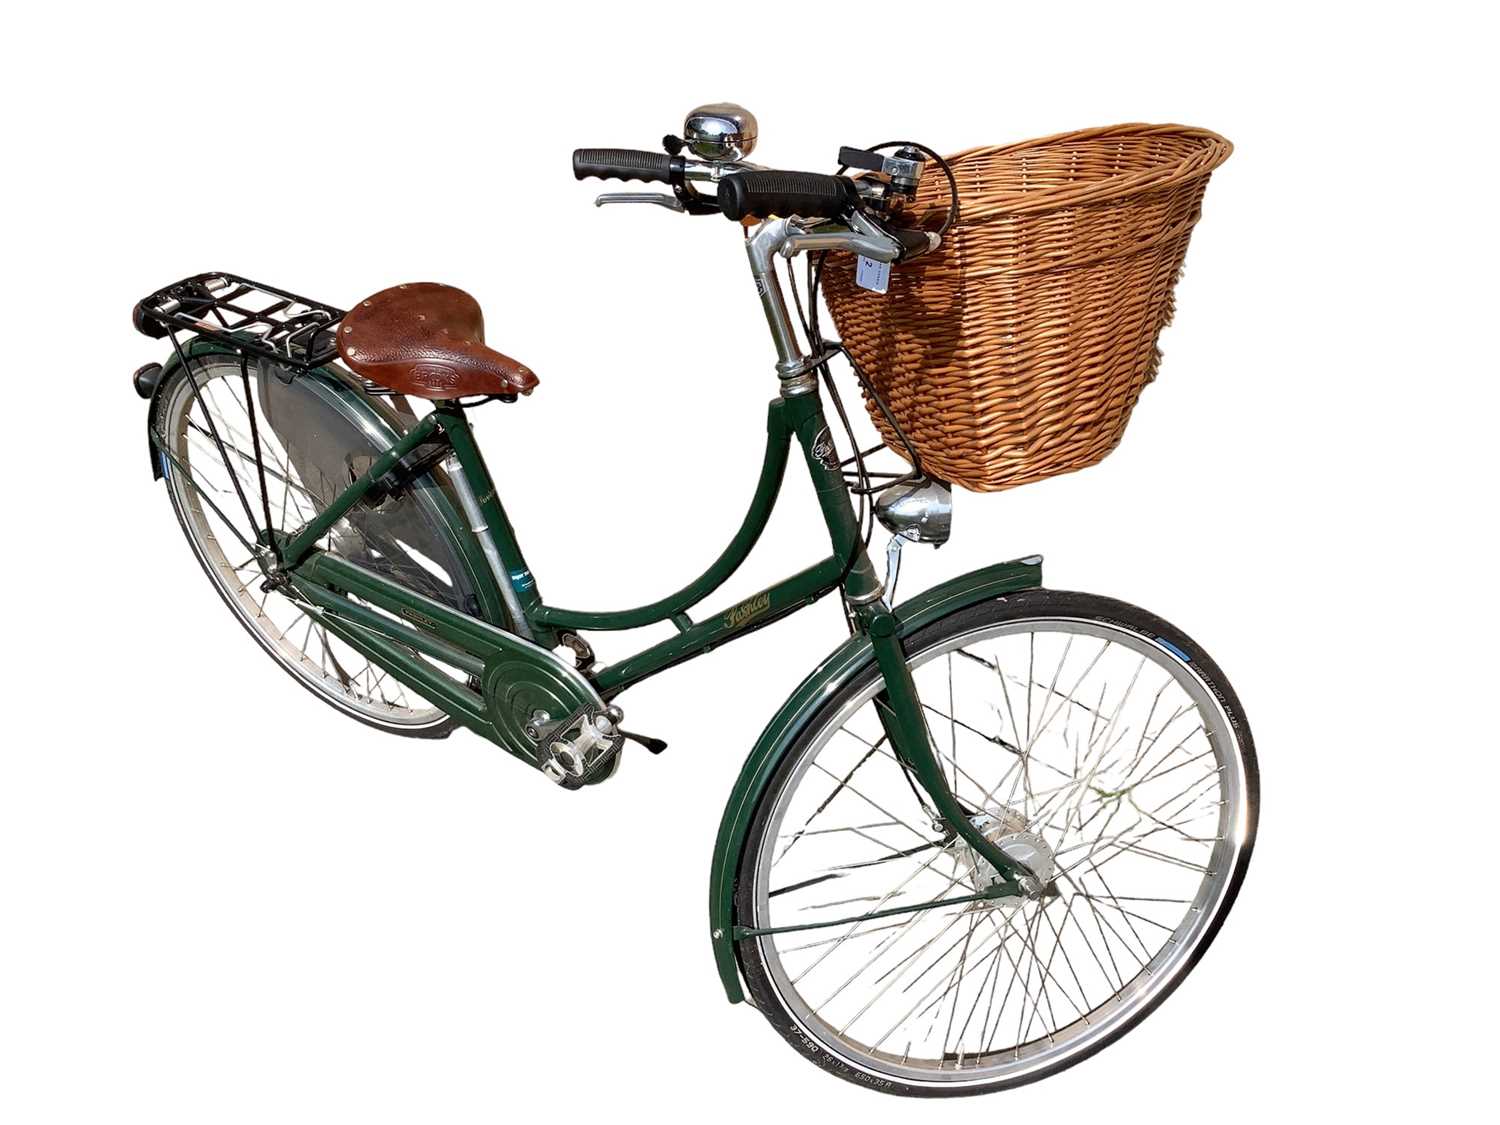 Pashley Vintage style Ladies cycle ( cost £800 new)